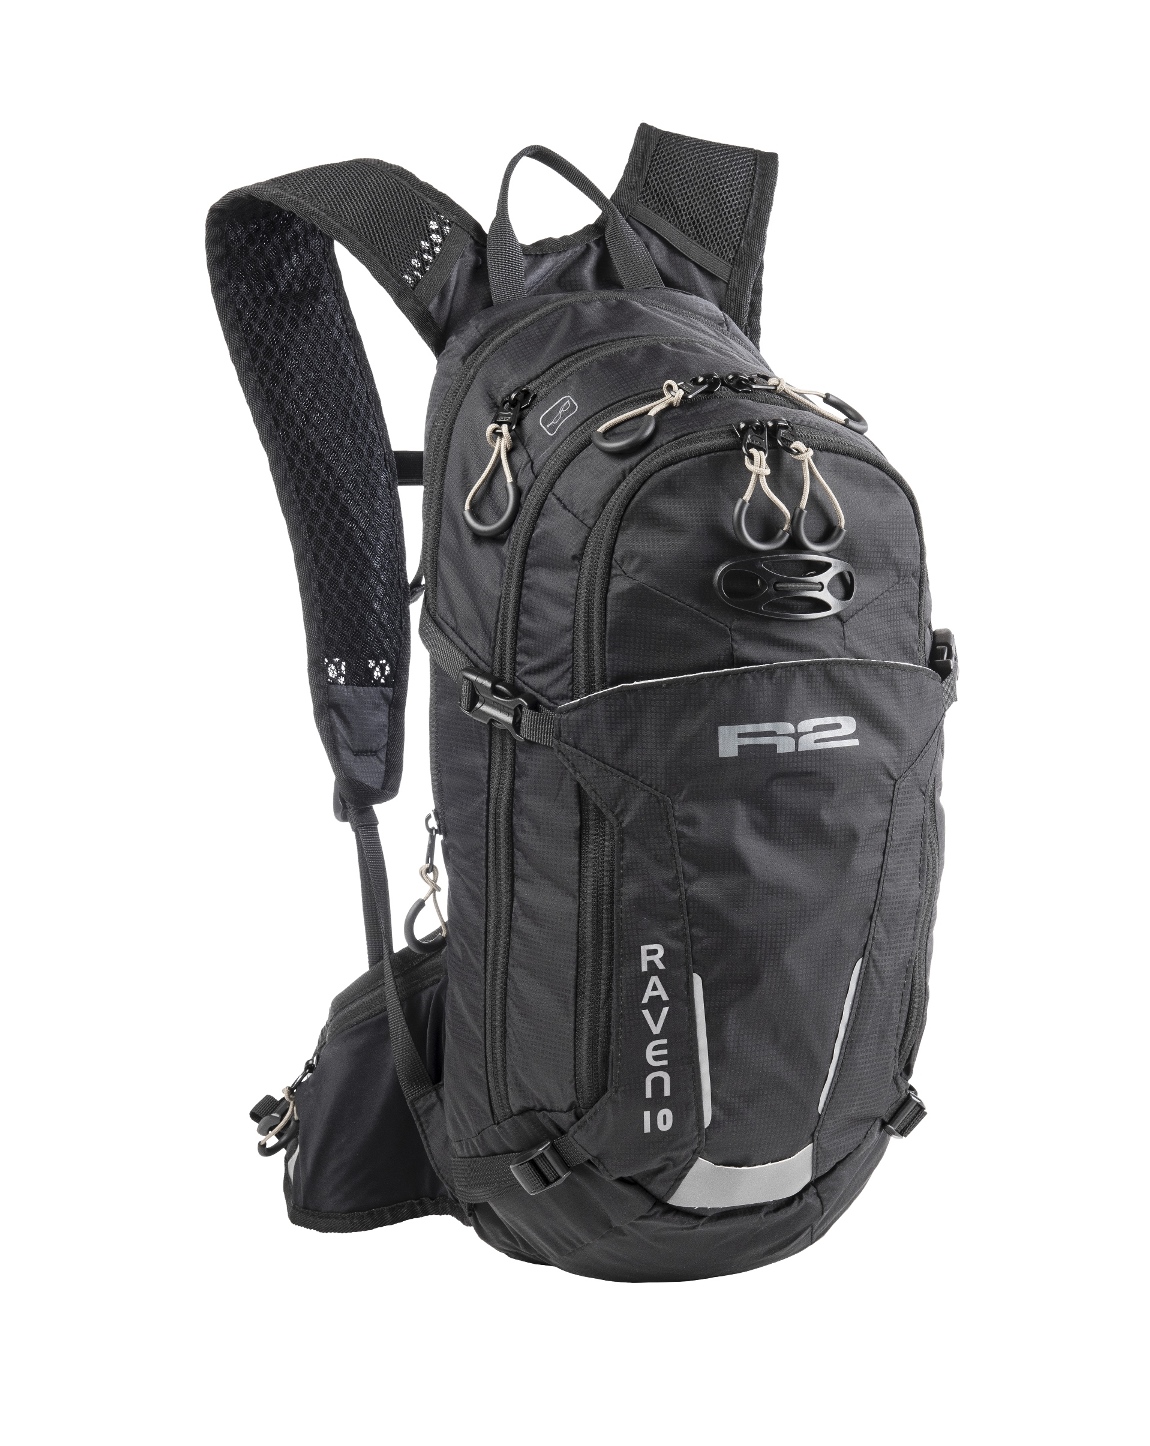 SPORT BACKPACK R2 TRACKER ATBP04A